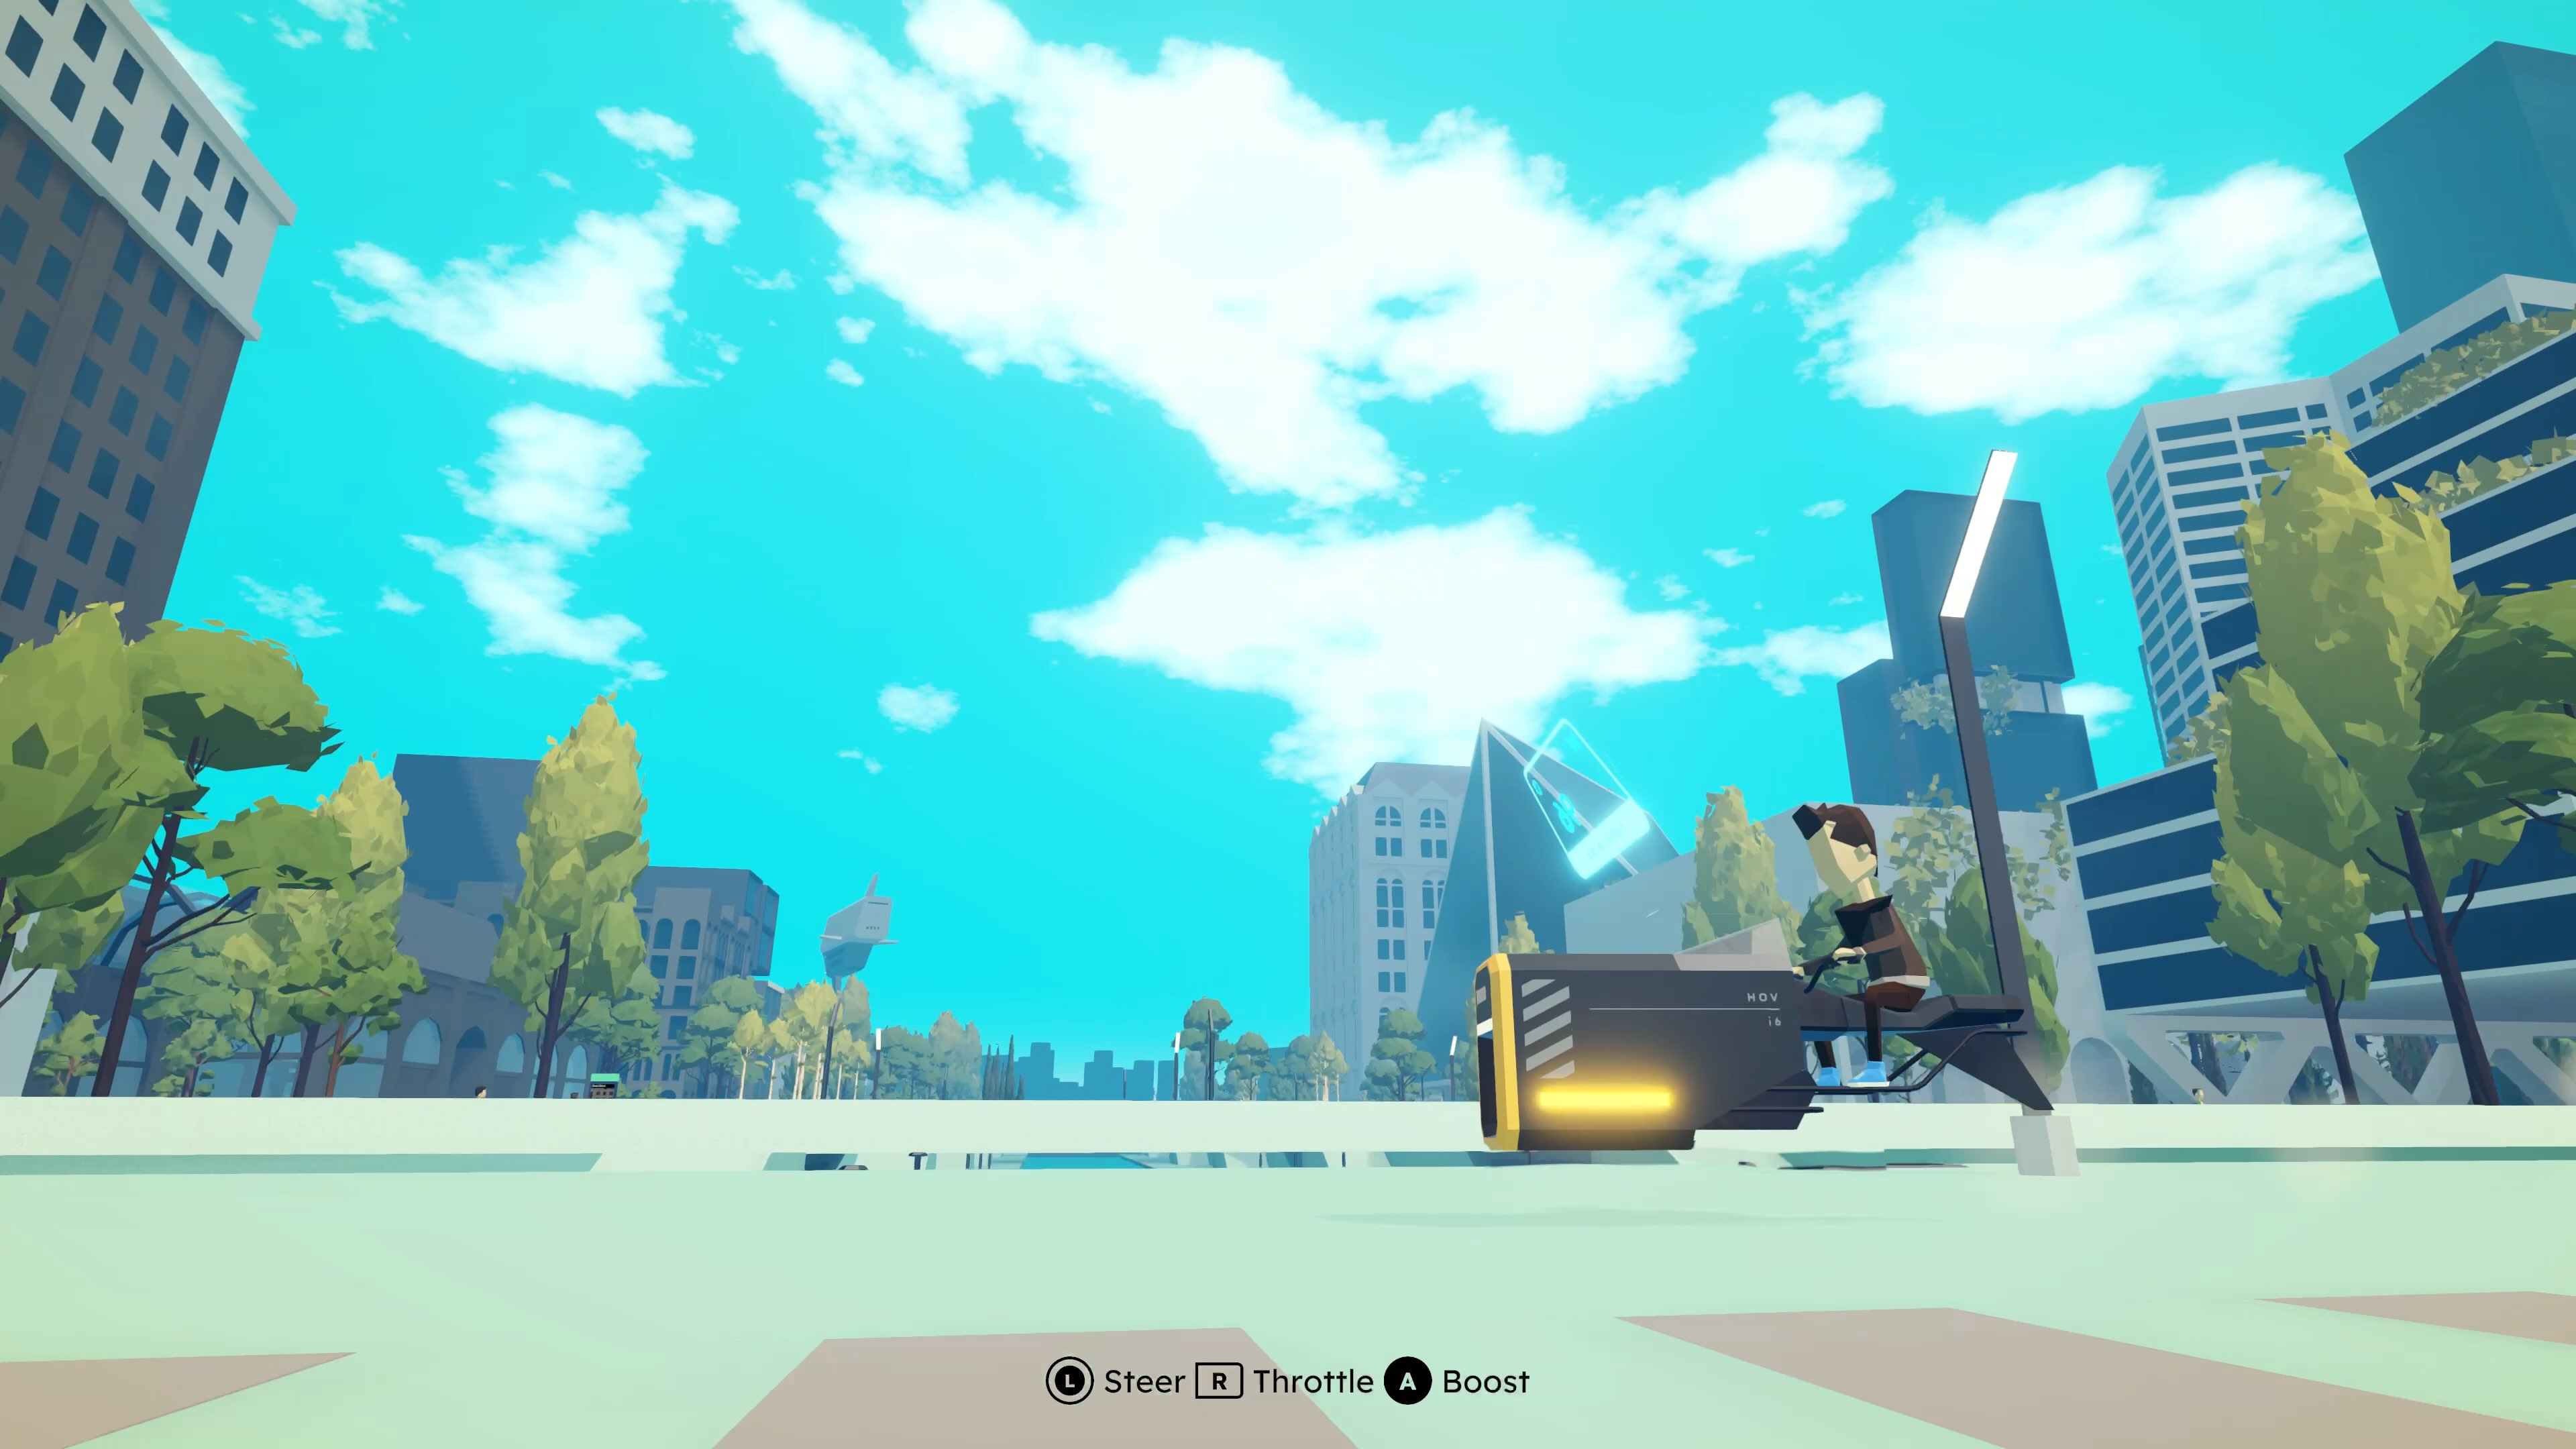 Protagonist riding hoverbike